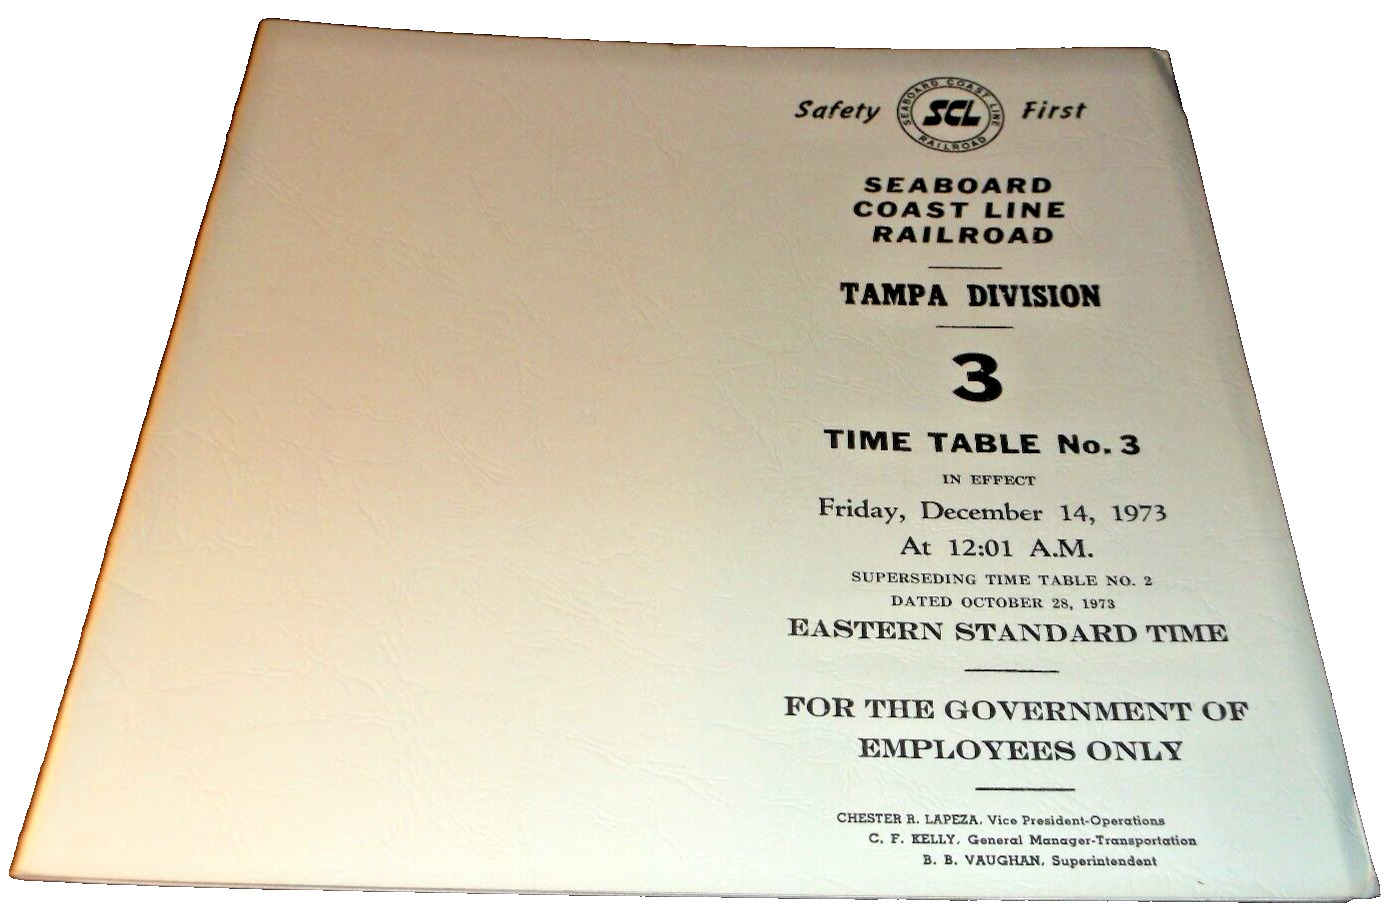 DECEMBER 1973 SCL SEABOARD COAST LINE TAMPA DIVISION EMPLOYEE TIMETABLE #3